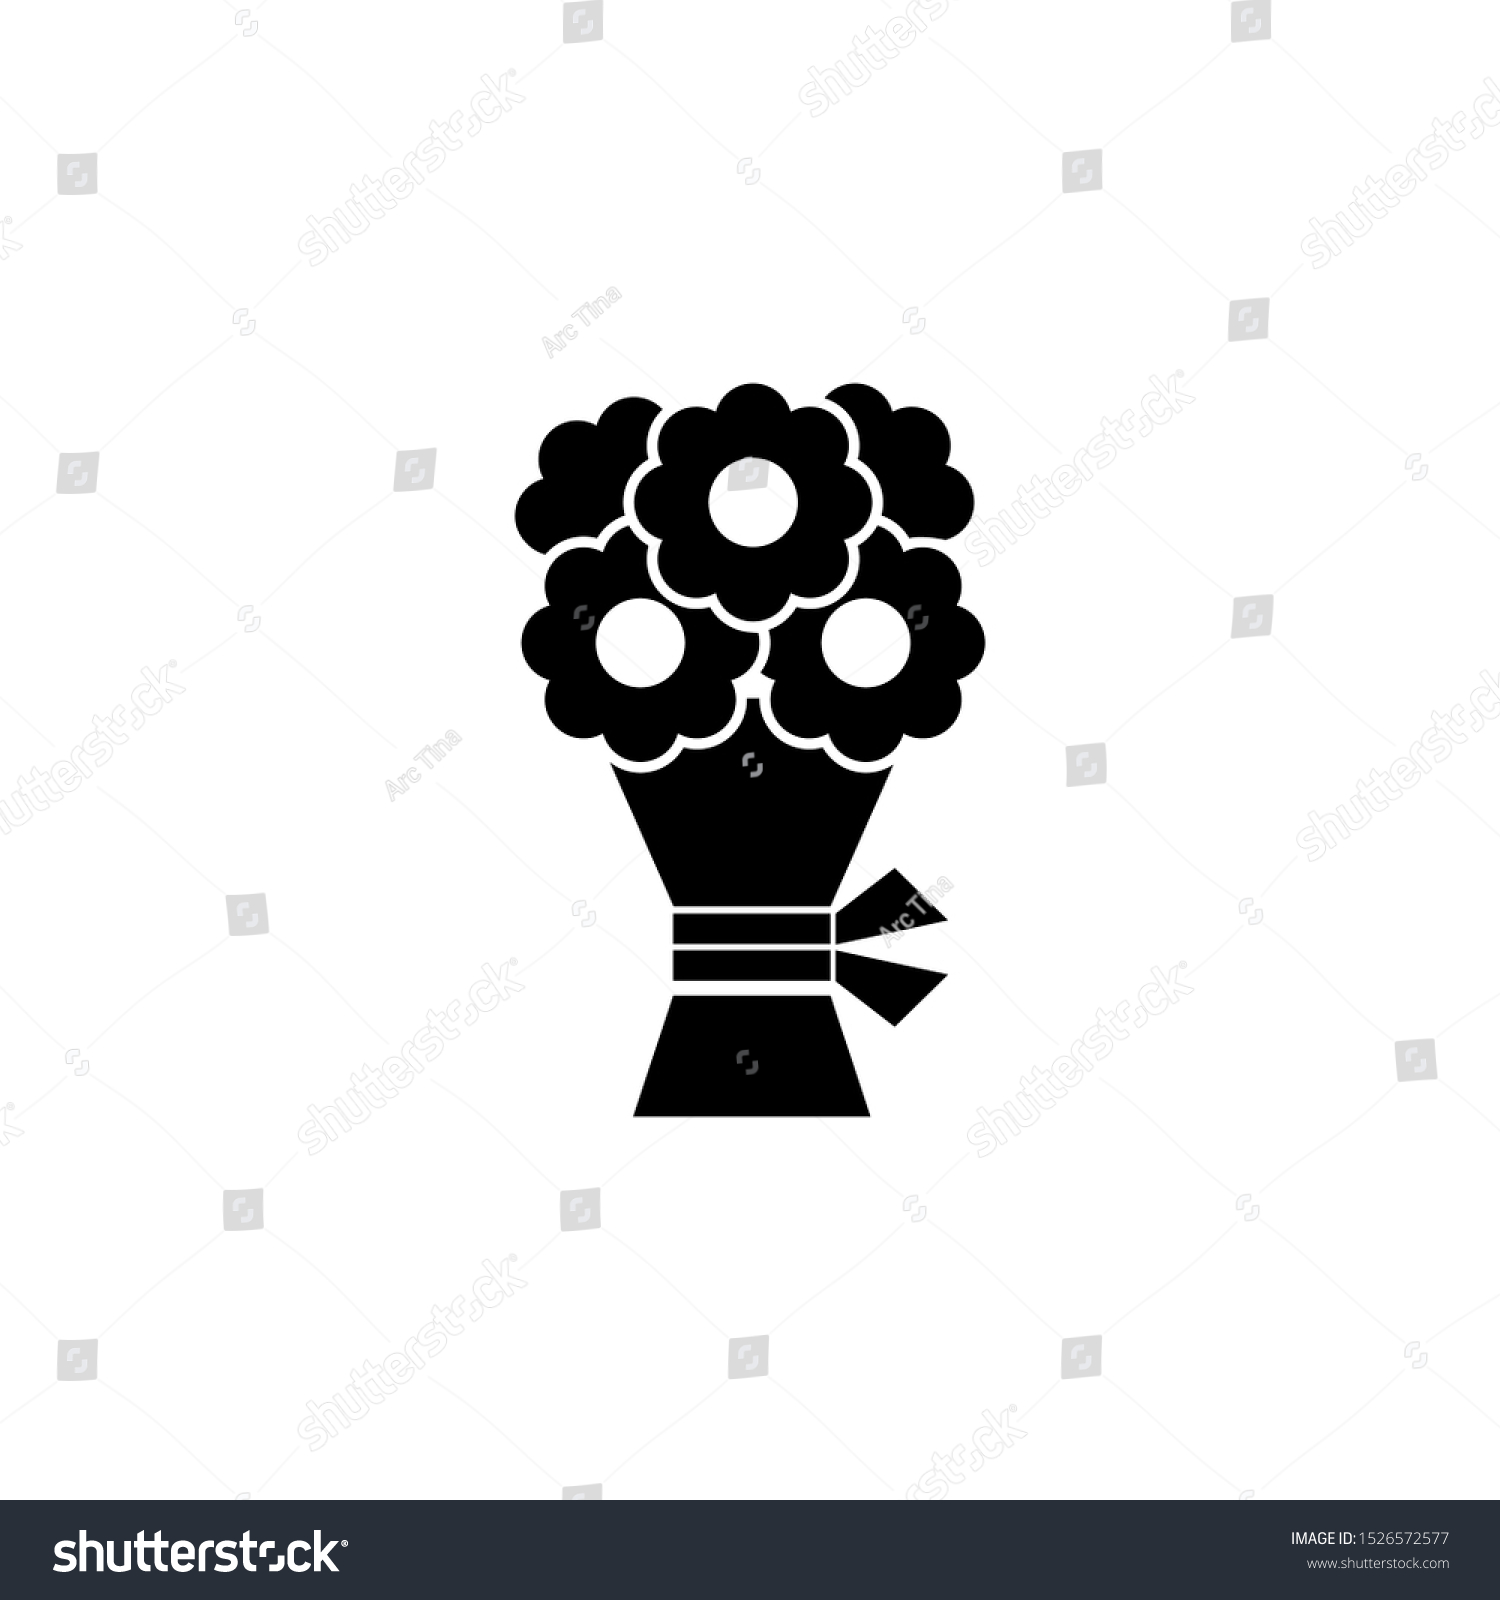 SVG of Wedding Flower Bouquet. Flat Vector Icon illustration. Simple black symbol on white background. Wedding Flower Bouquet sign design template for web and mobile UI element svg